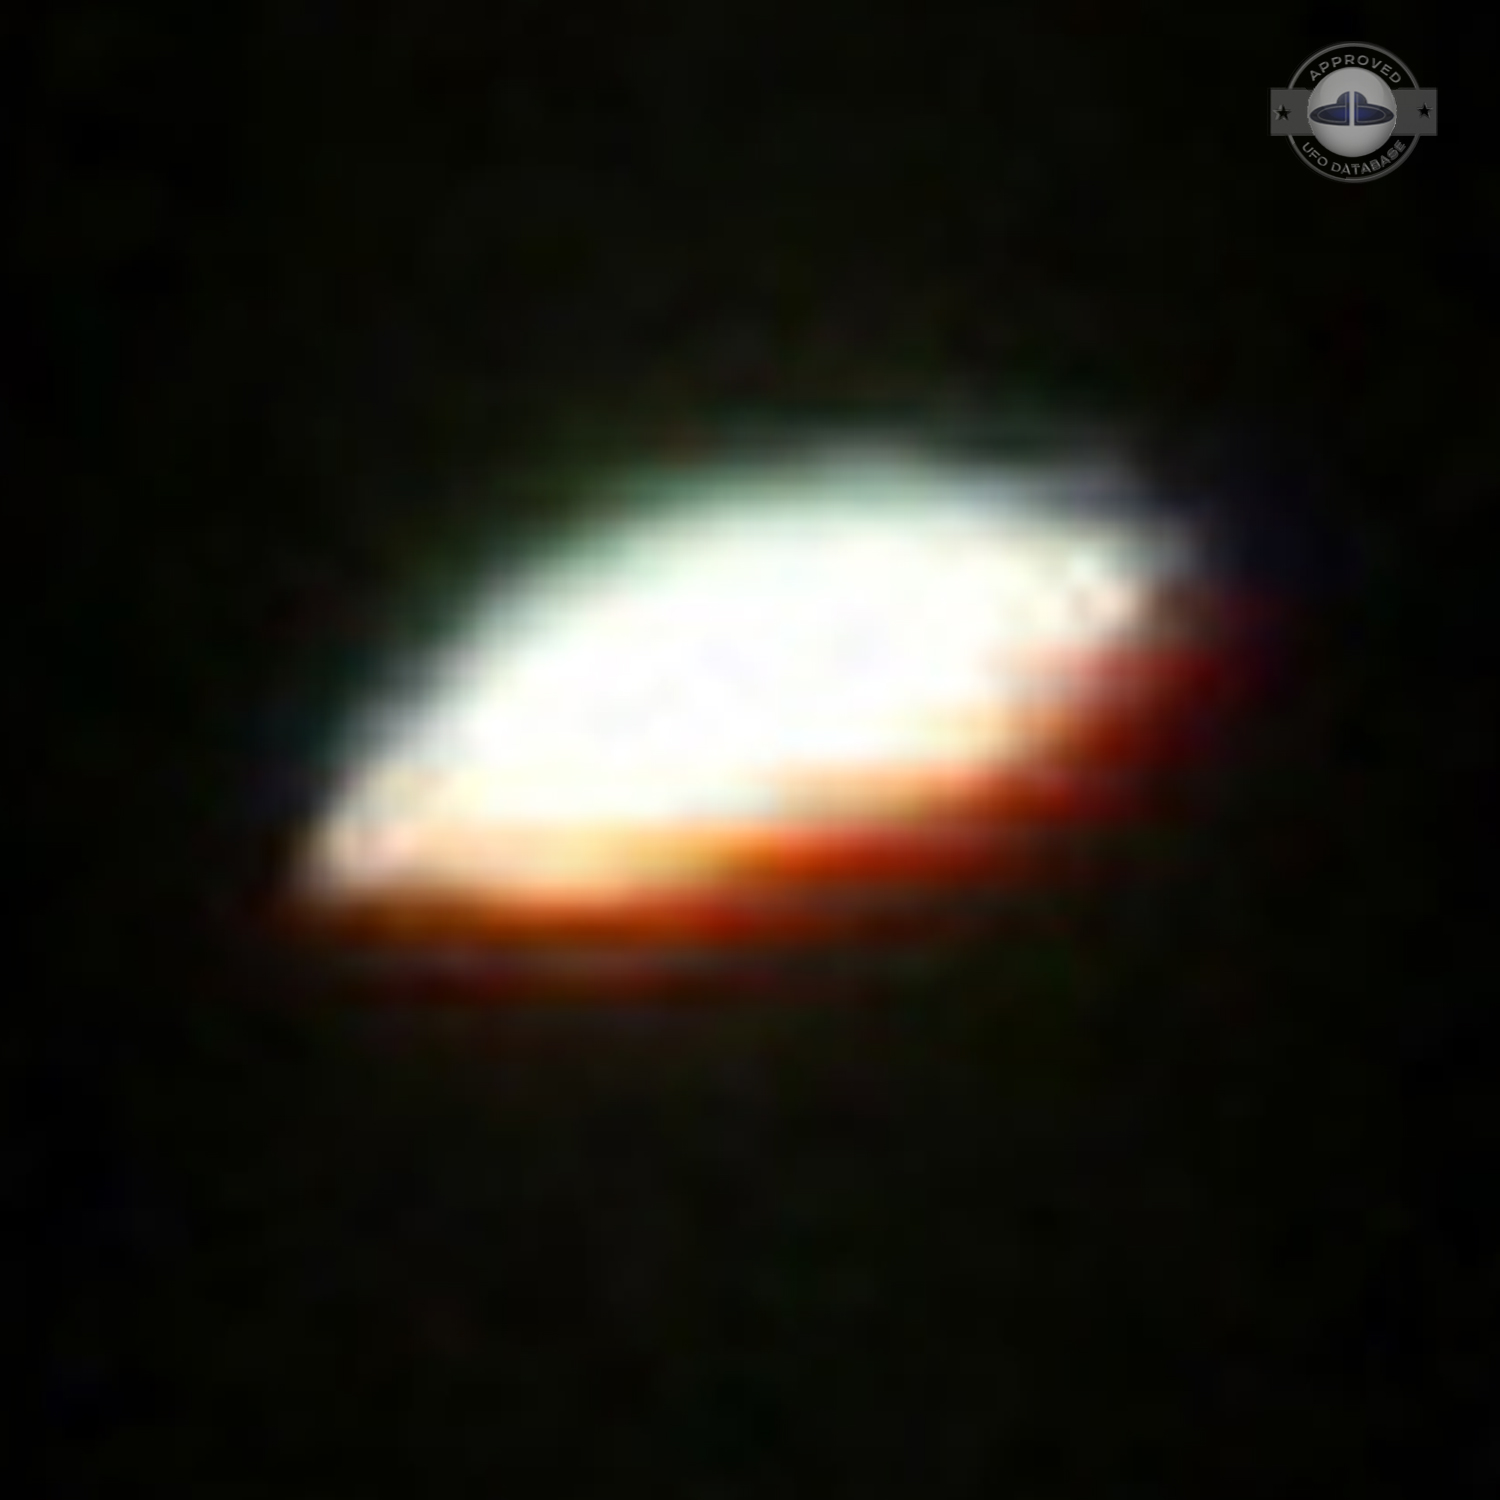 Norway UFO Picture Shot by Professional Aviation photographer 2011 UFO Picture #232-4